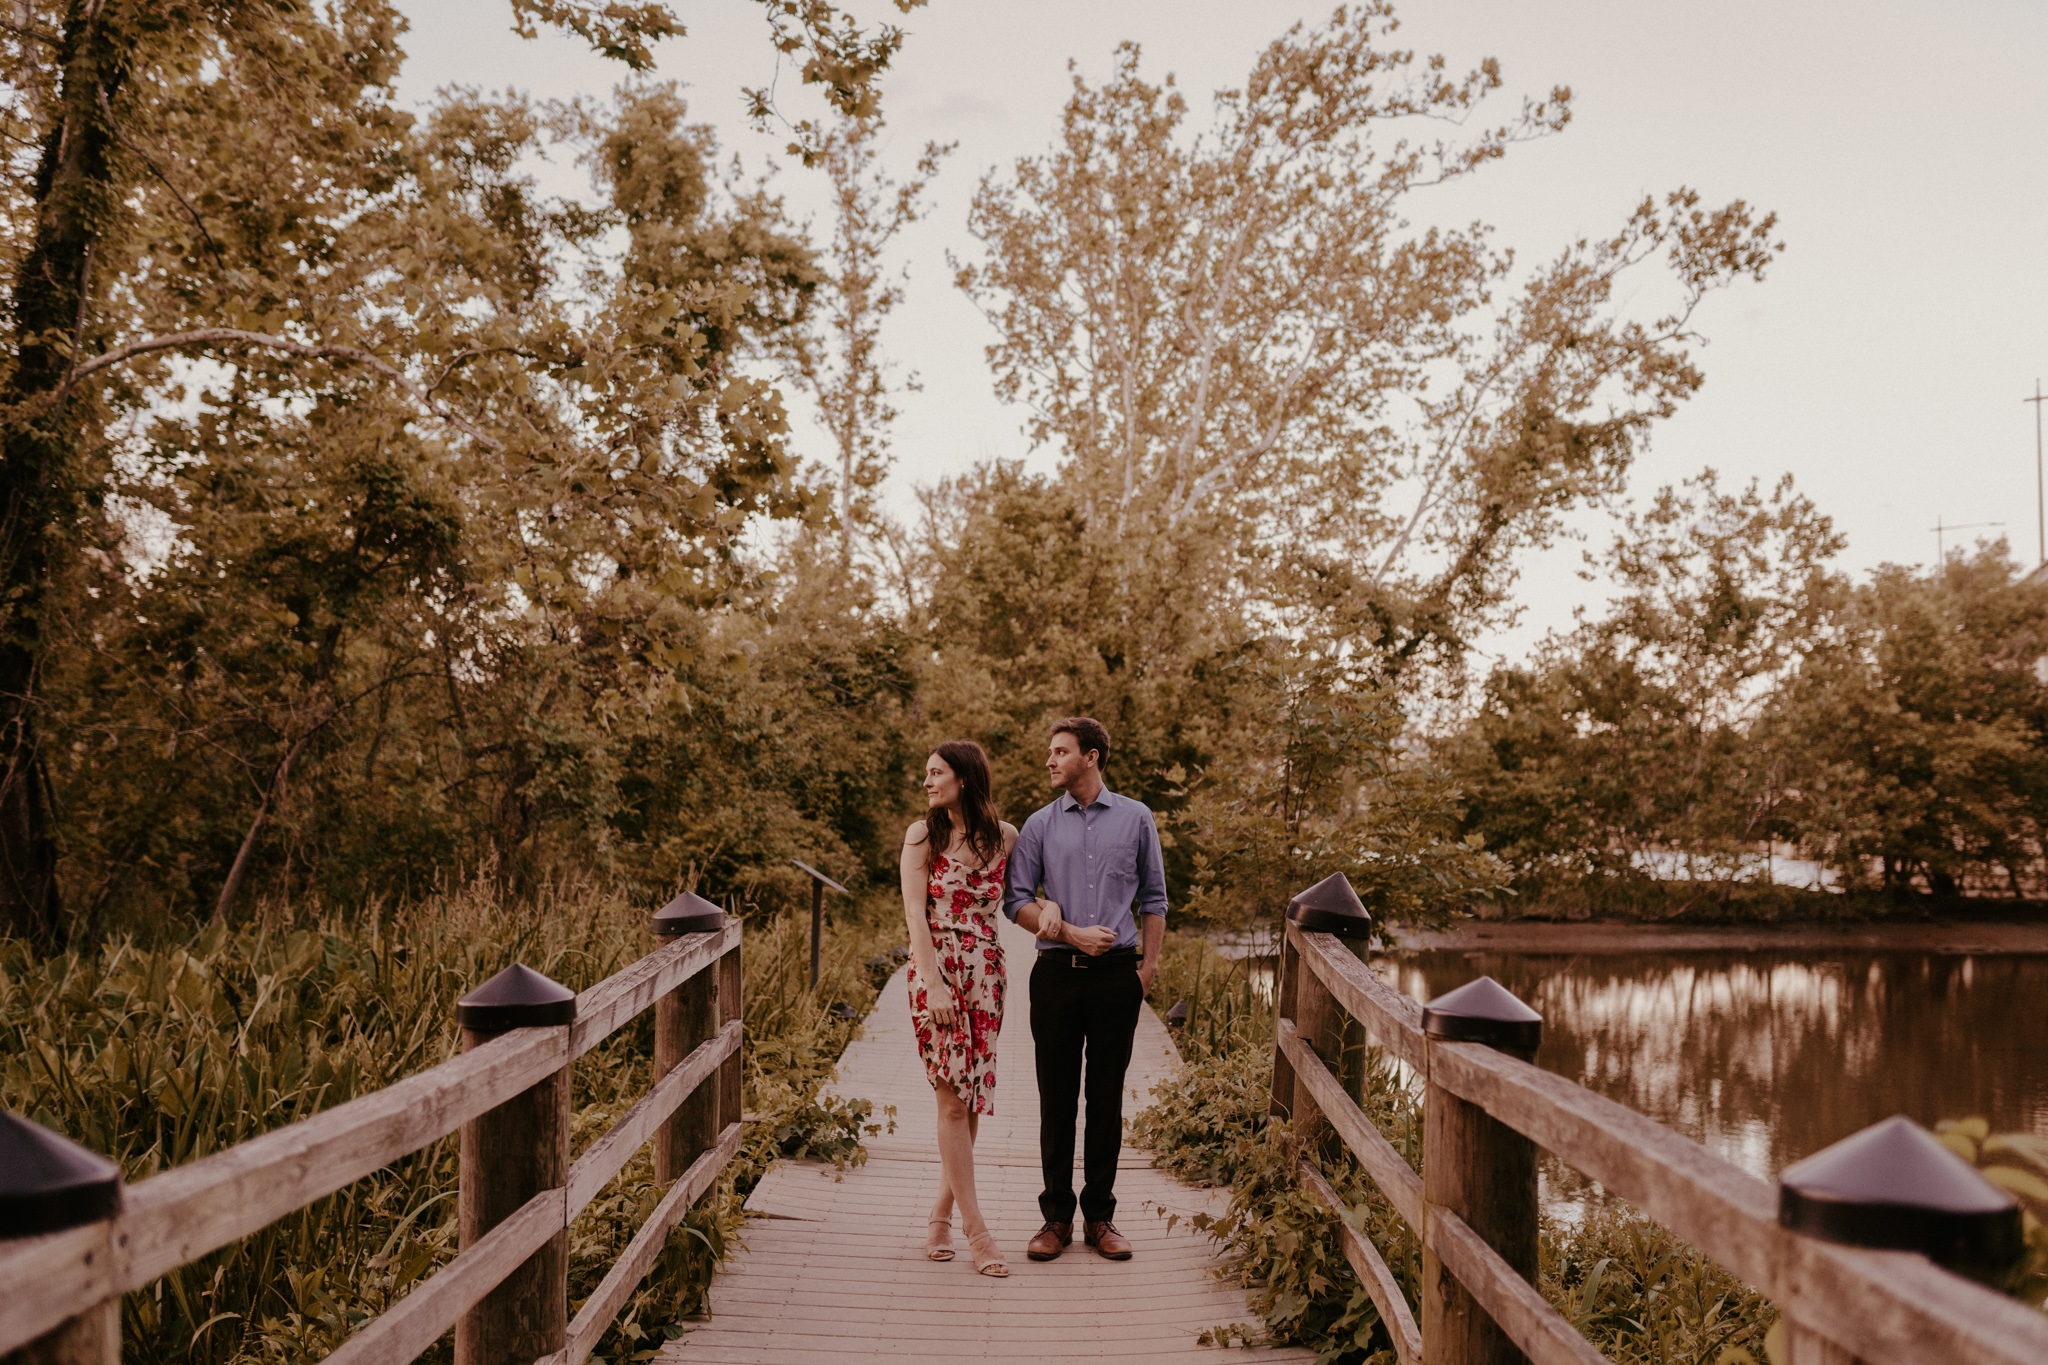 Outdoor DC park engagement session with a view, woods, and wildlife